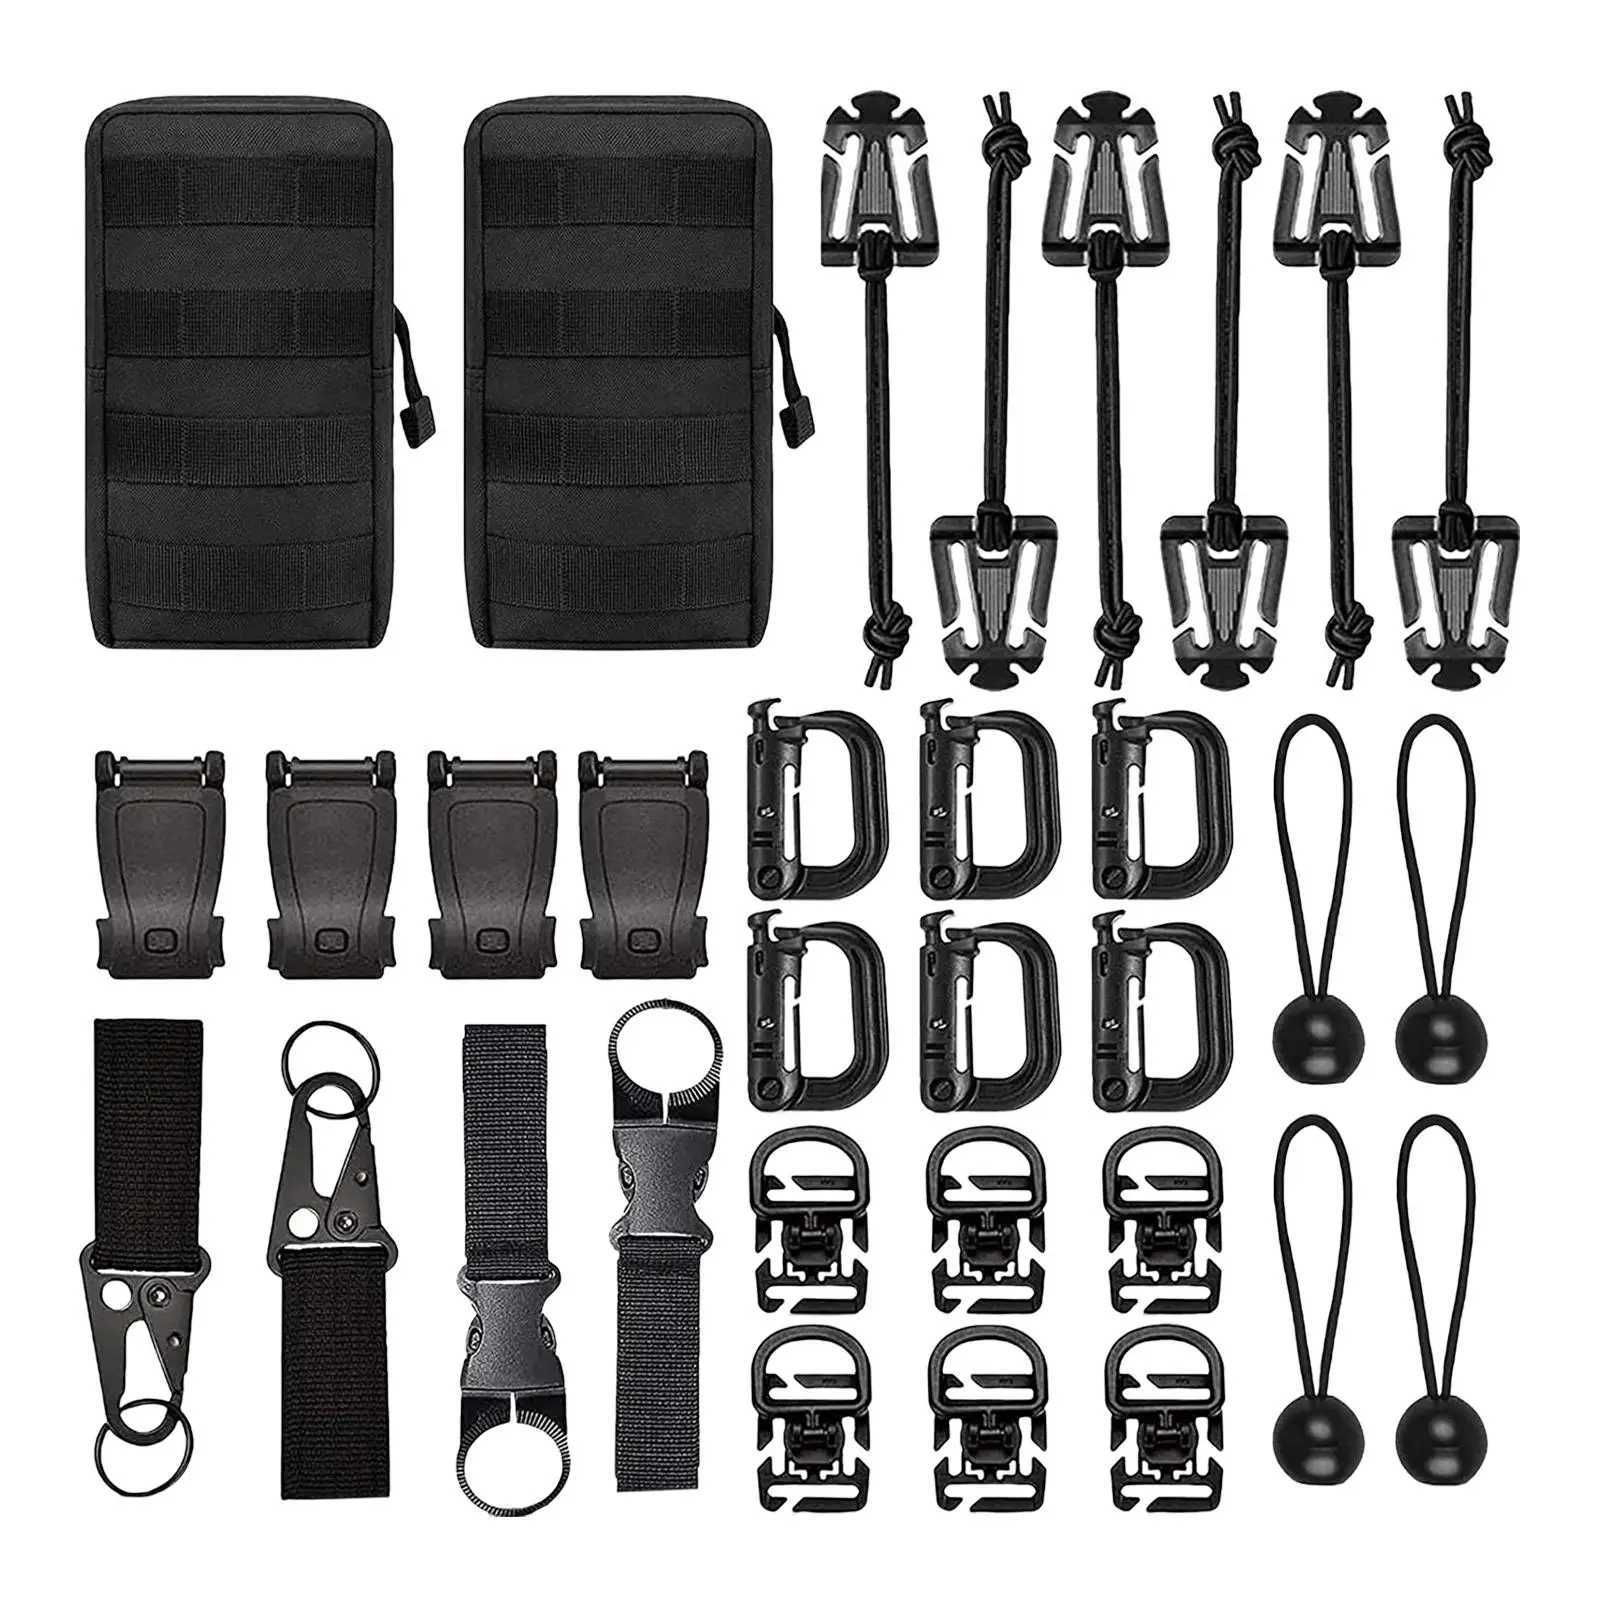 Backpack Accessories Kit Attachments Locking Gear Clip Bags Utility Belt